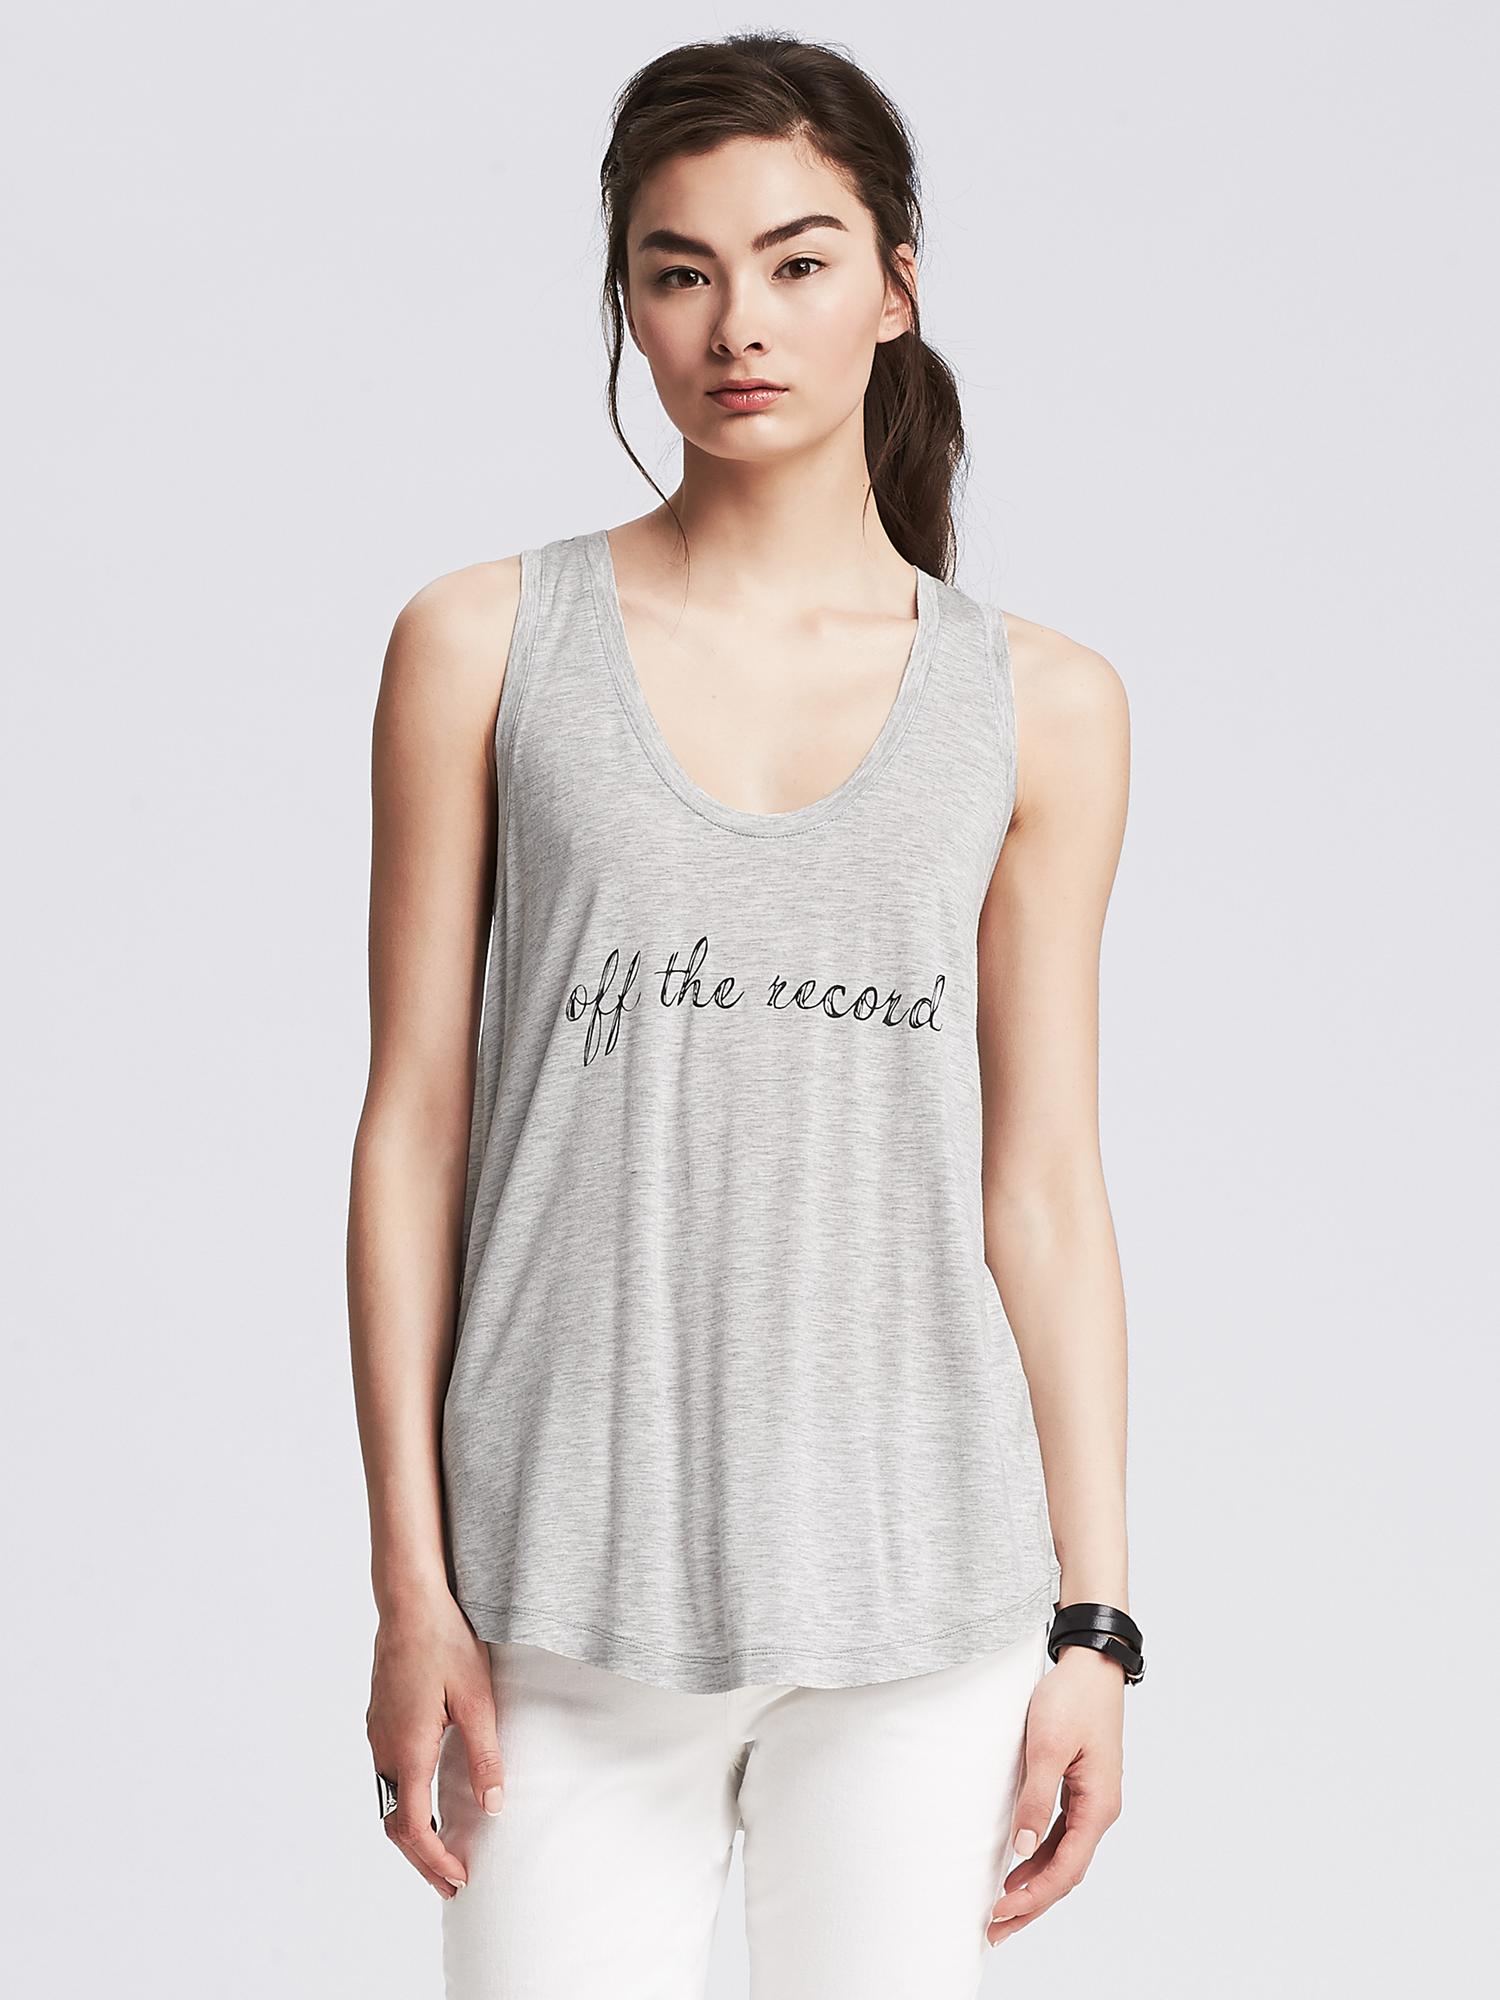 "Off the Record" Graphic Tank